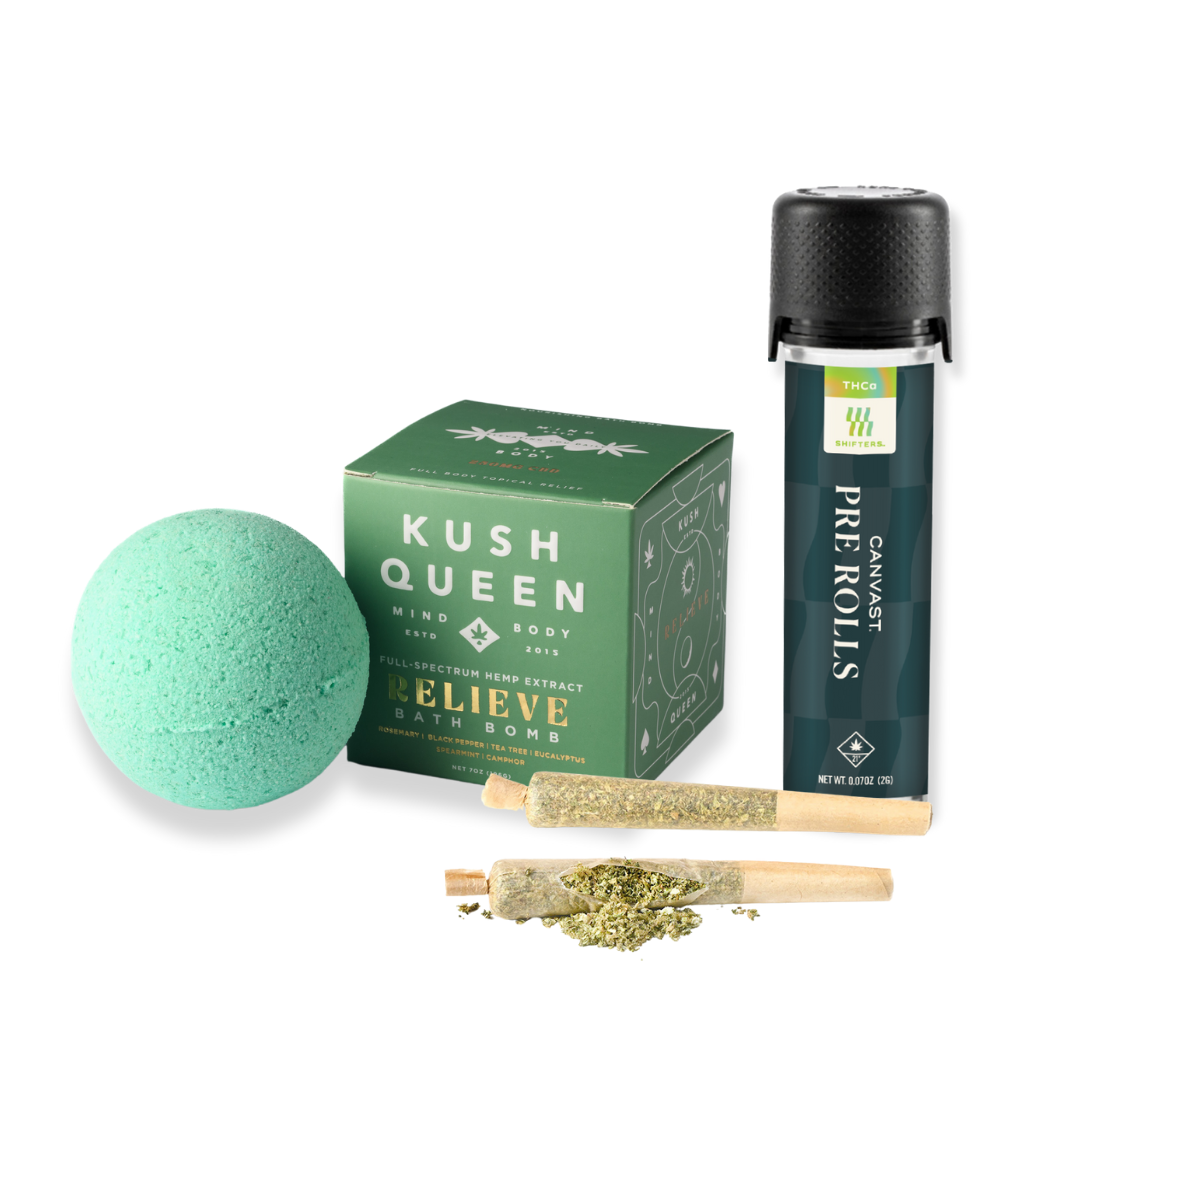 Soak and Toke Bundle Offer including 1 Kush Queen Bath Bomb and 1 Canvast Shifters THCa Pre Roll tube, 2 pre rolls to a tube. Priced at $40-45, dependent on the choice of CBD of THC Bath Bomb.